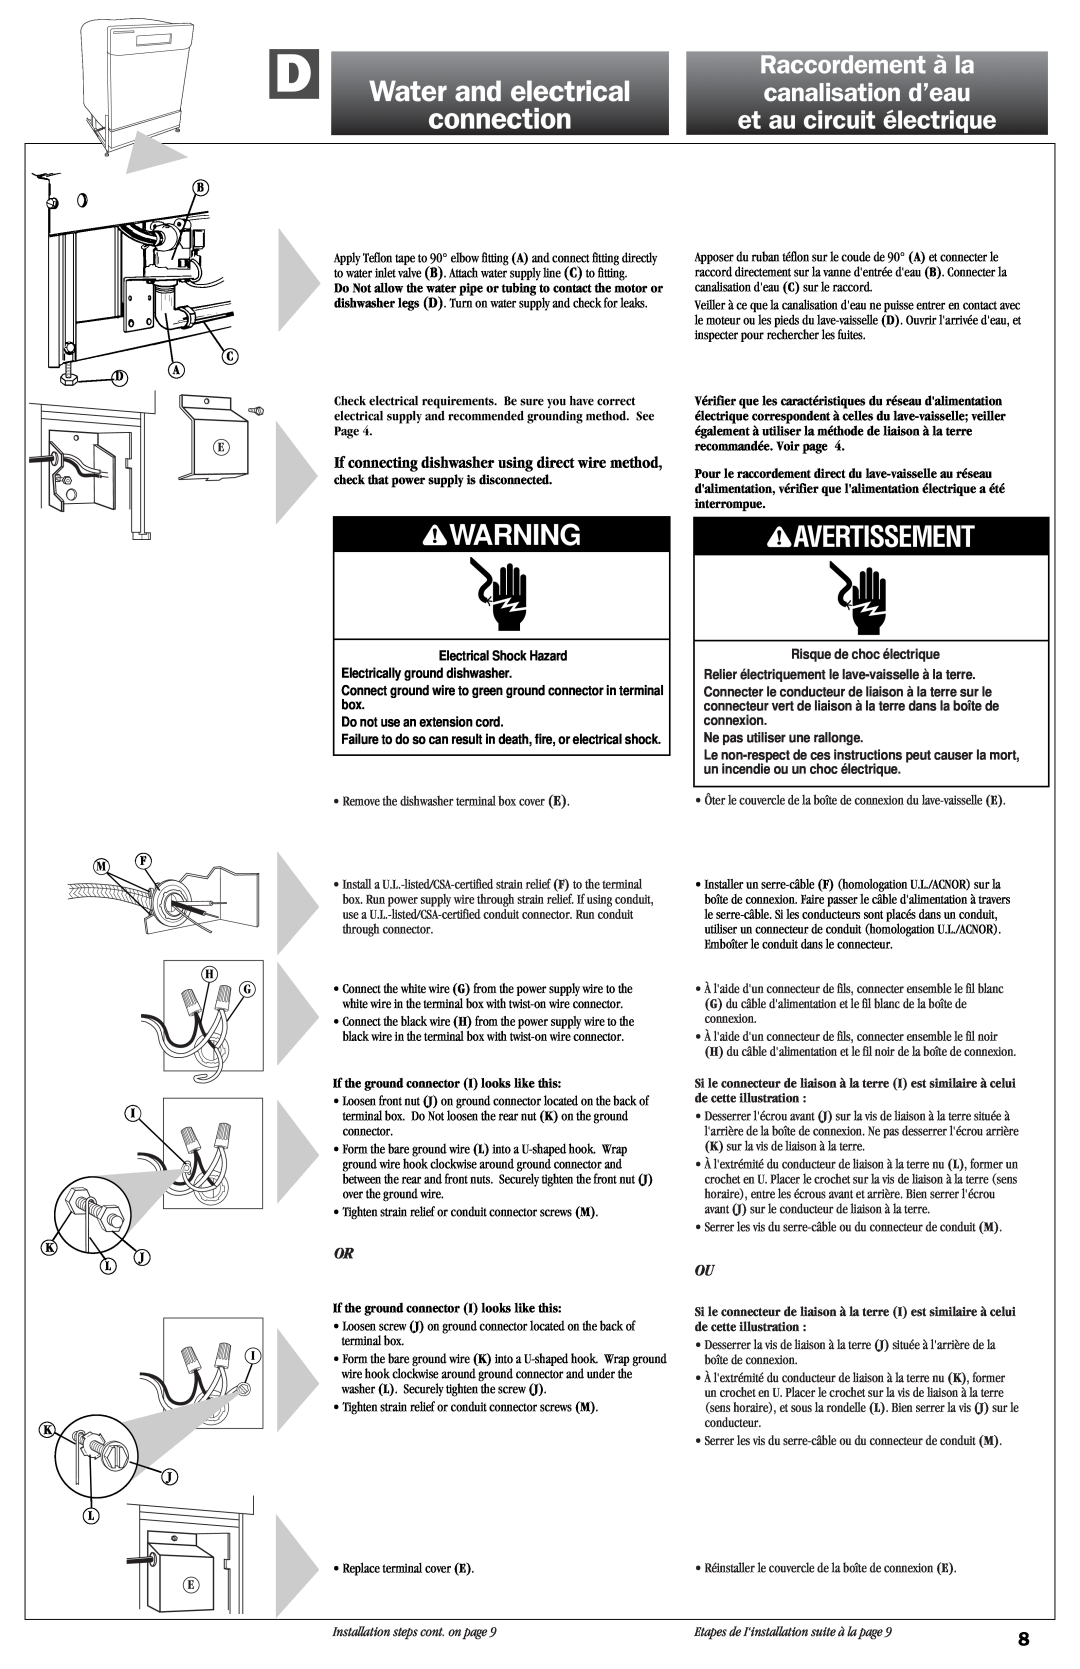 KitchenAid 9743822 Water and electrical, connection, Avertissement, If connecting dishwasher using direct wire method 